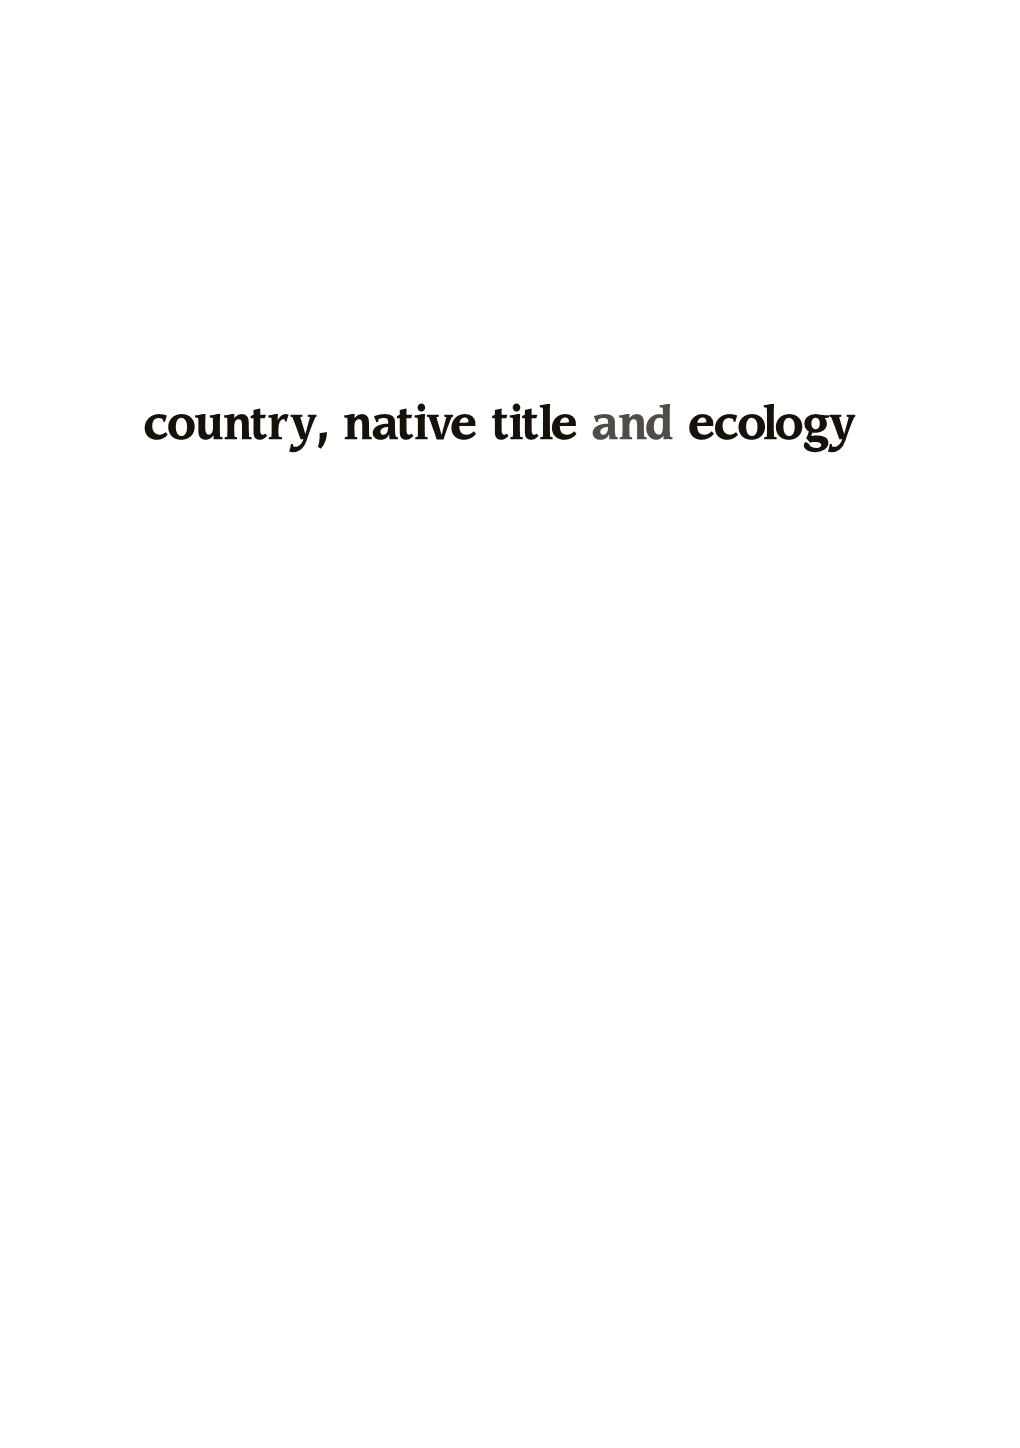 Country, Native Title and Ecology Country, Native Title and Ecology